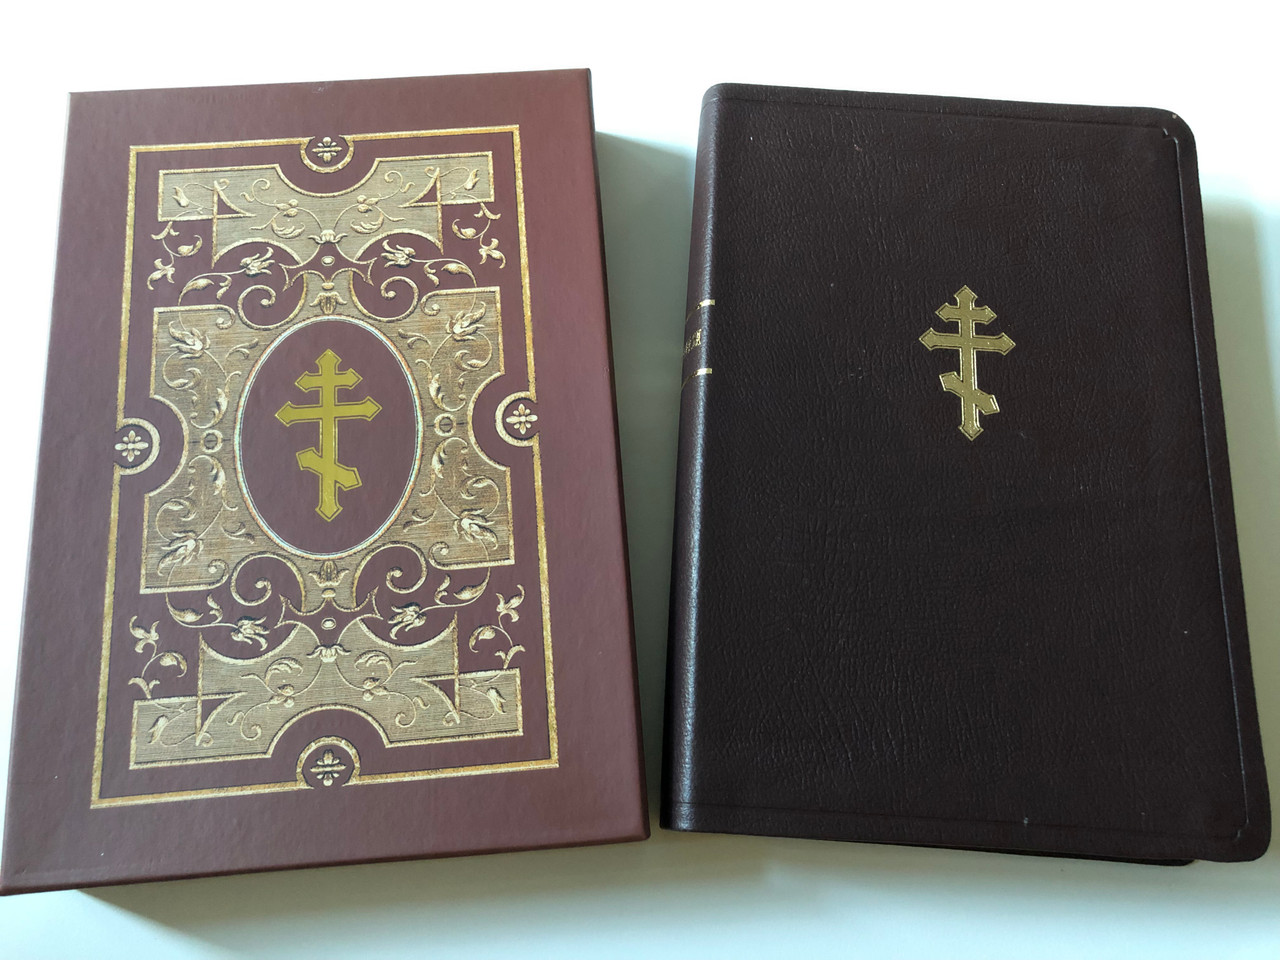 https://cdn10.bigcommerce.com/s-62bdpkt7pb/products/51182/images/260626/_-_Russian_Holy_Bible_1__44334.1670841801.1280.1280.JPG?c=2